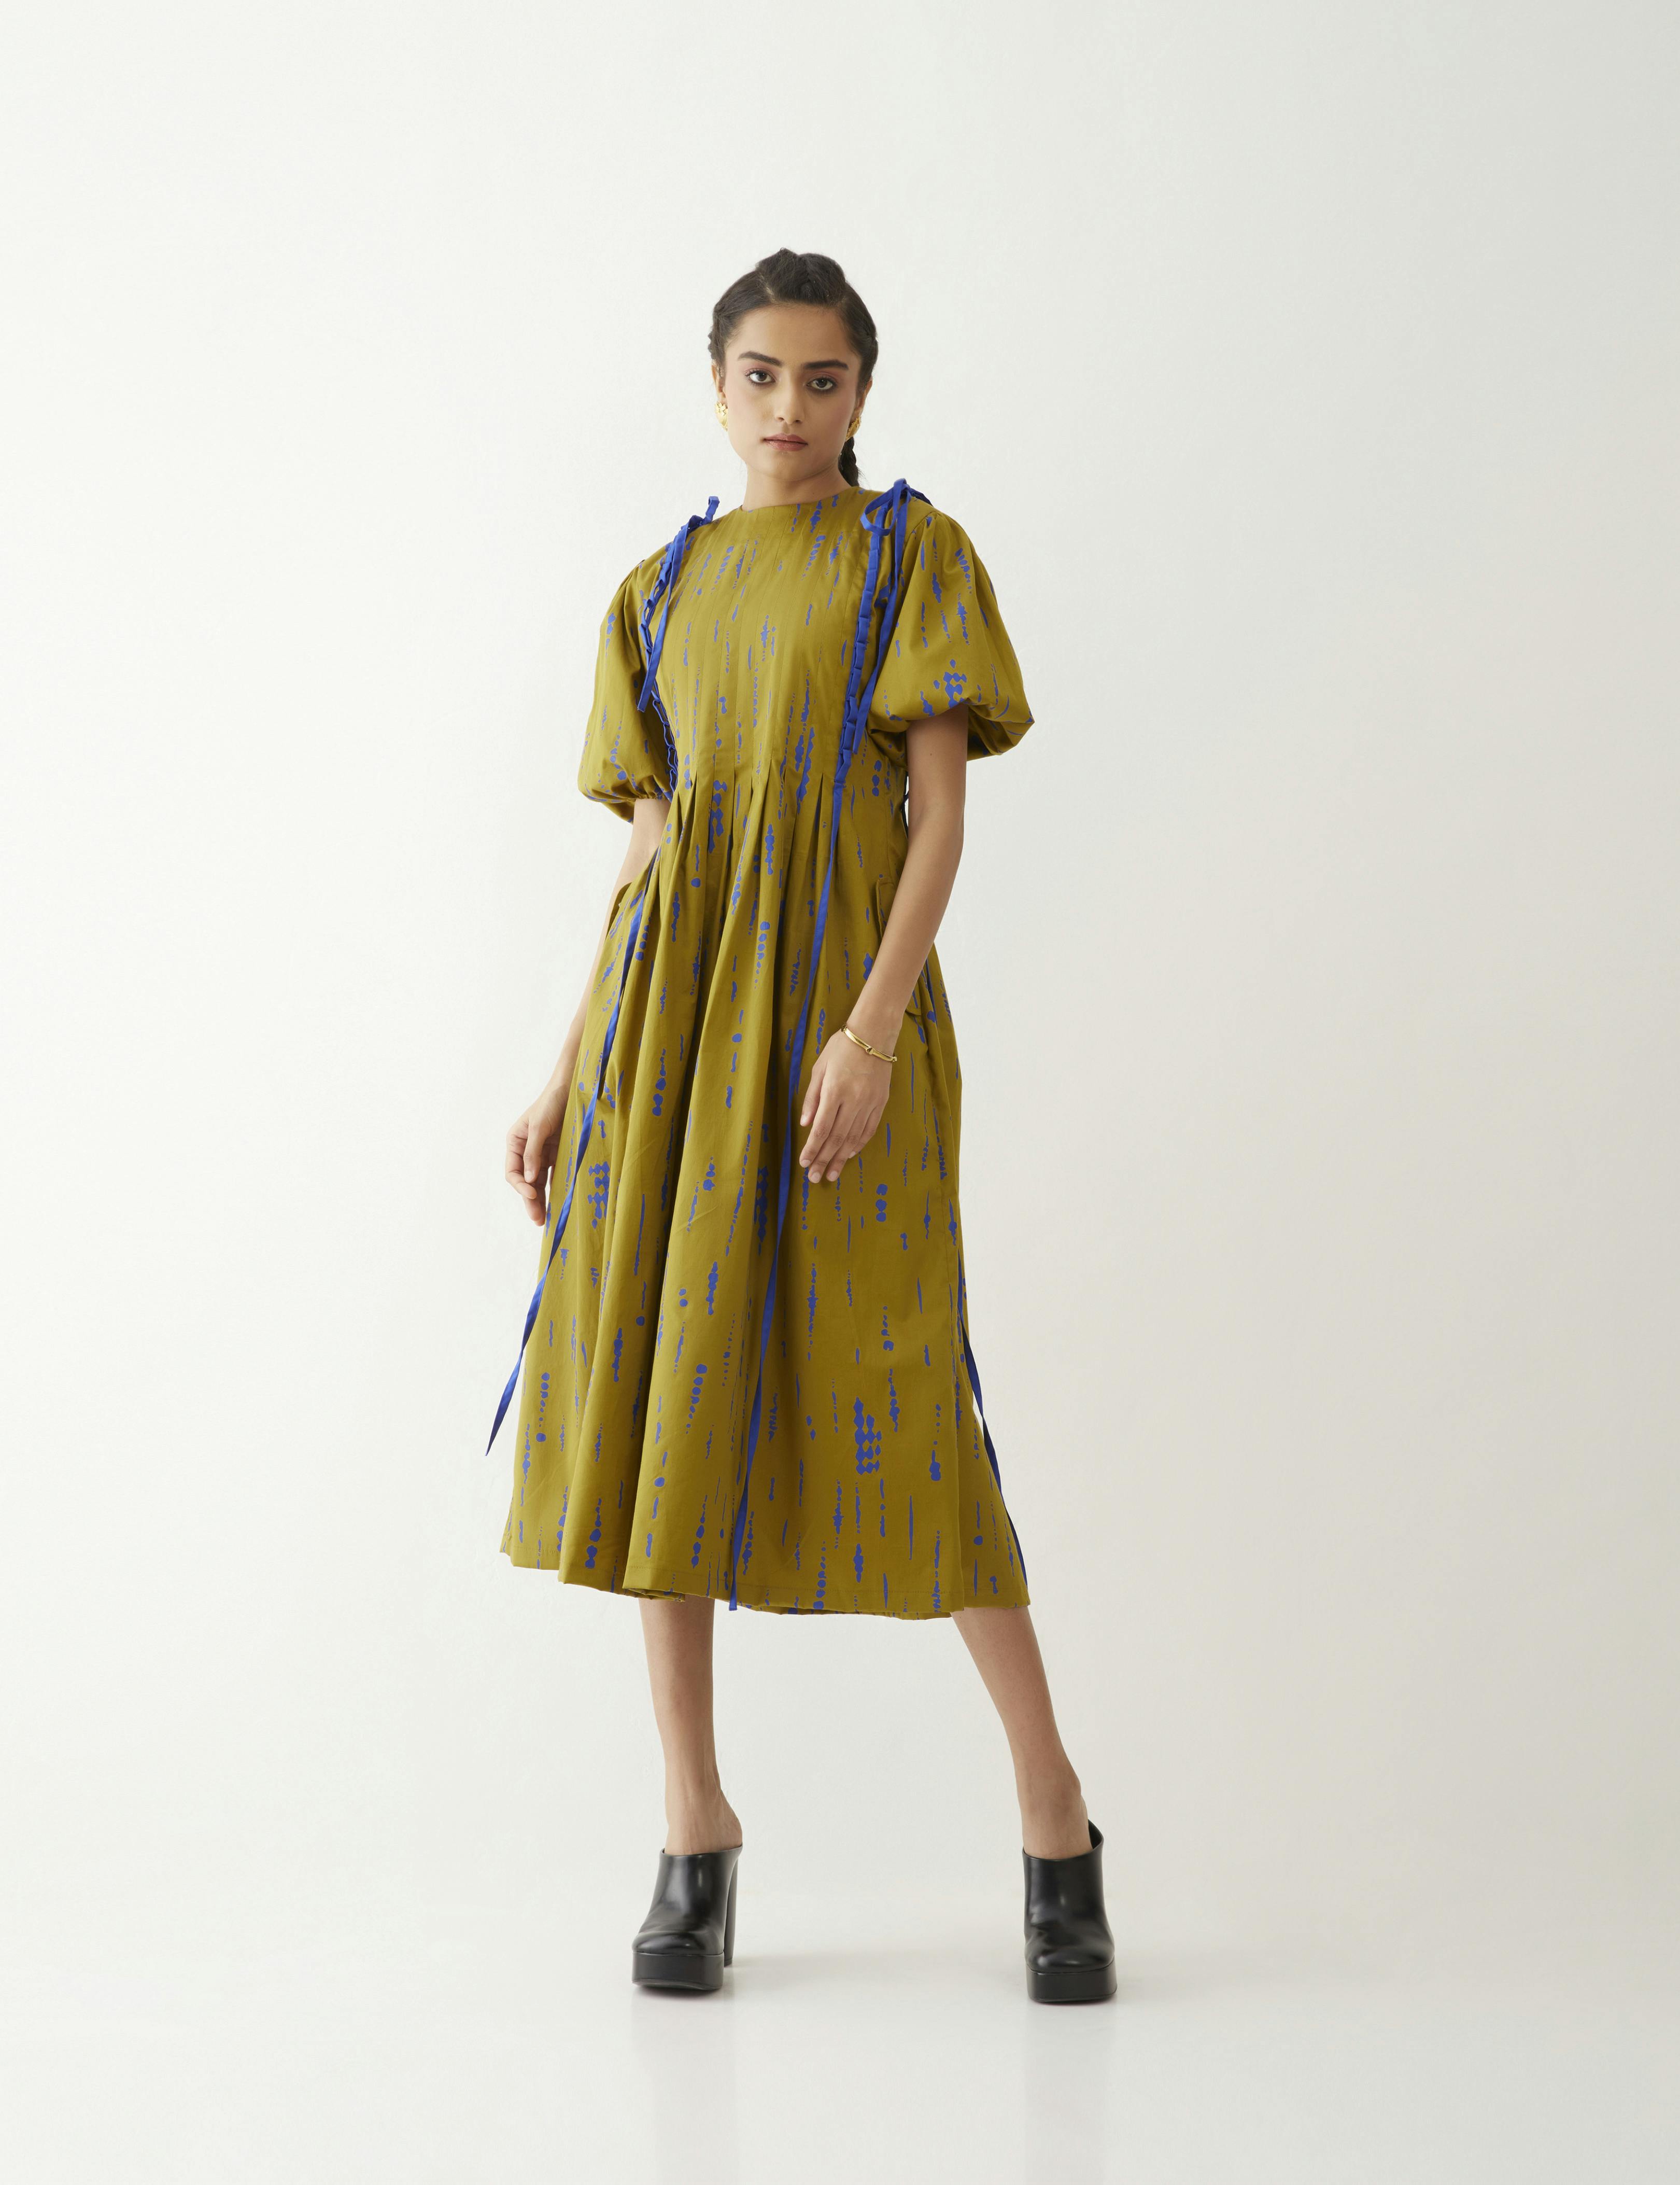 SIRA Dress, a product by Son of a Noble